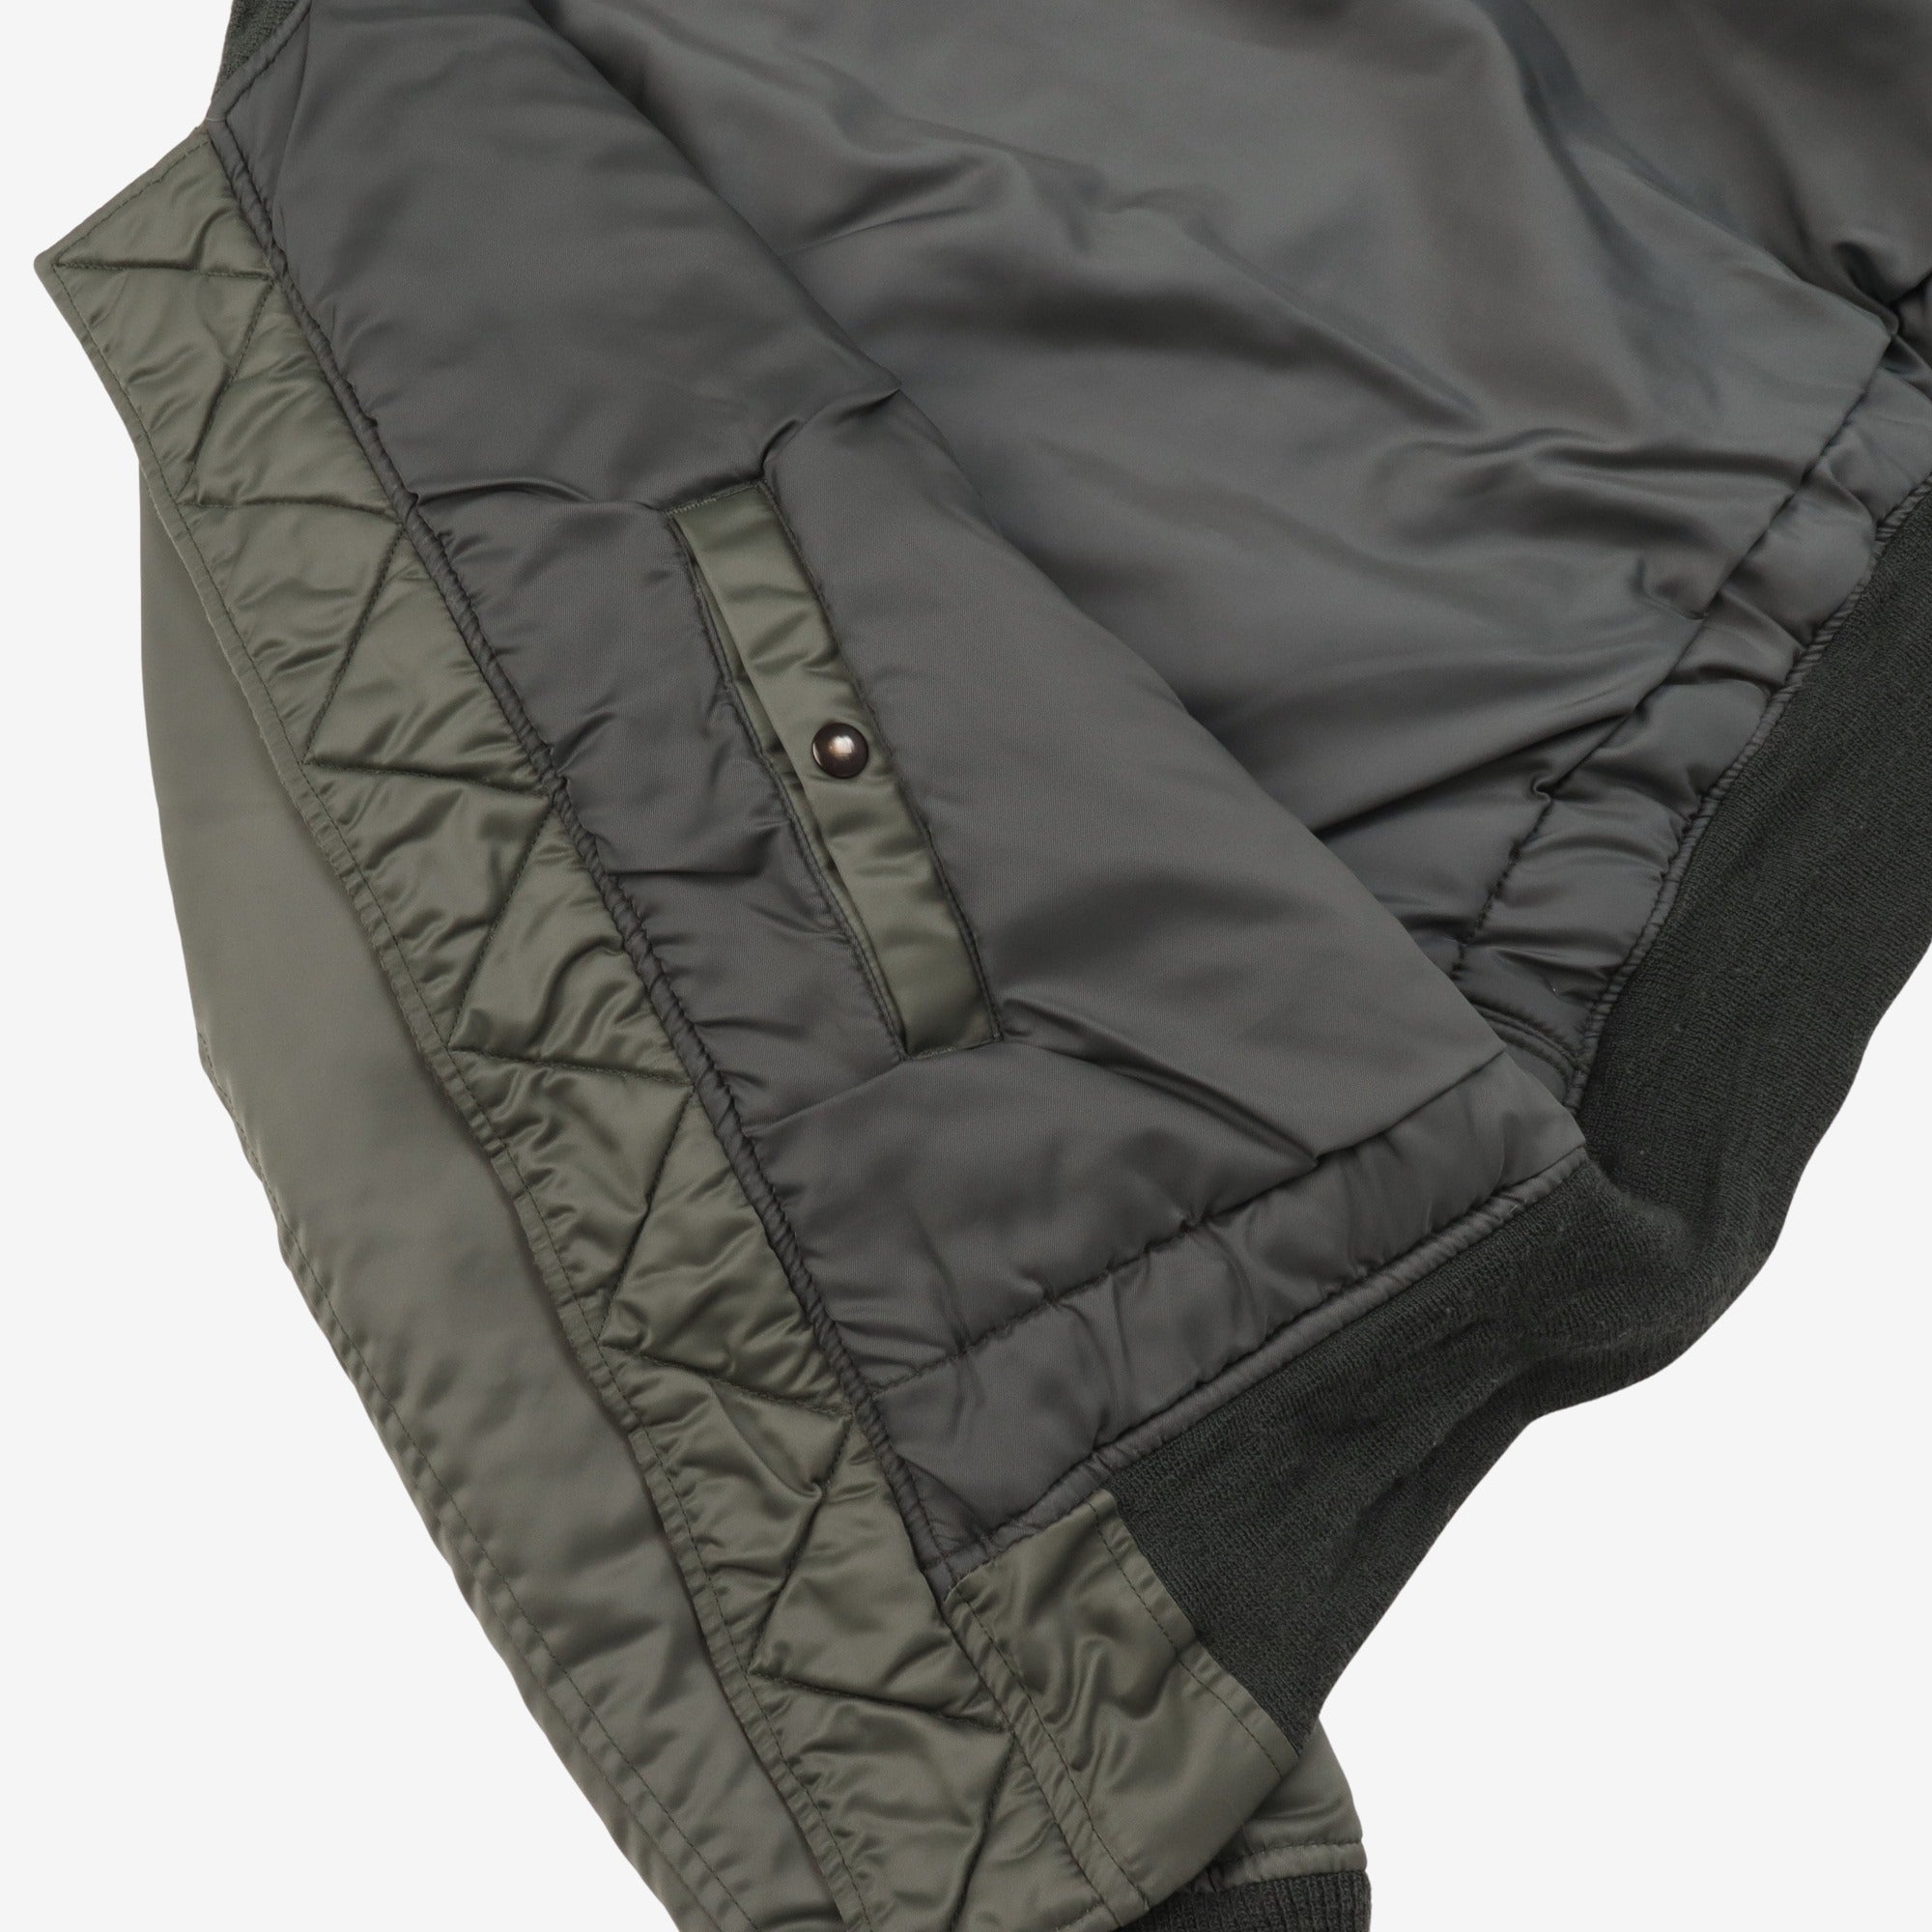 Type MA-1 Air Force Jacket